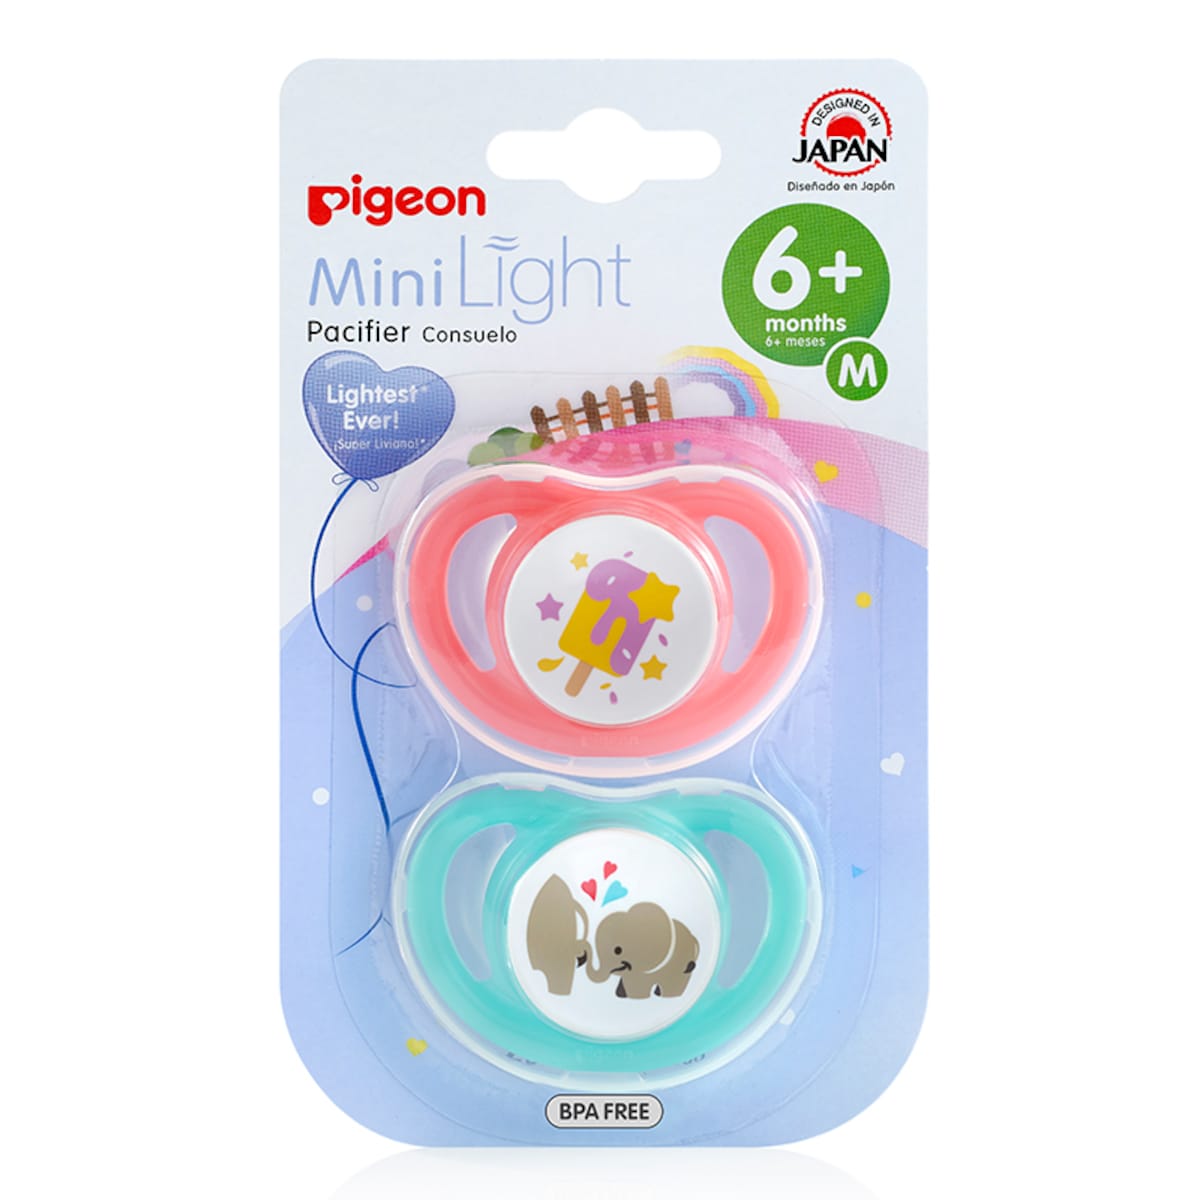 Pigeon Mini Light Pacifier Medium (6+ Months) Twin Pack (Colours selected at random)